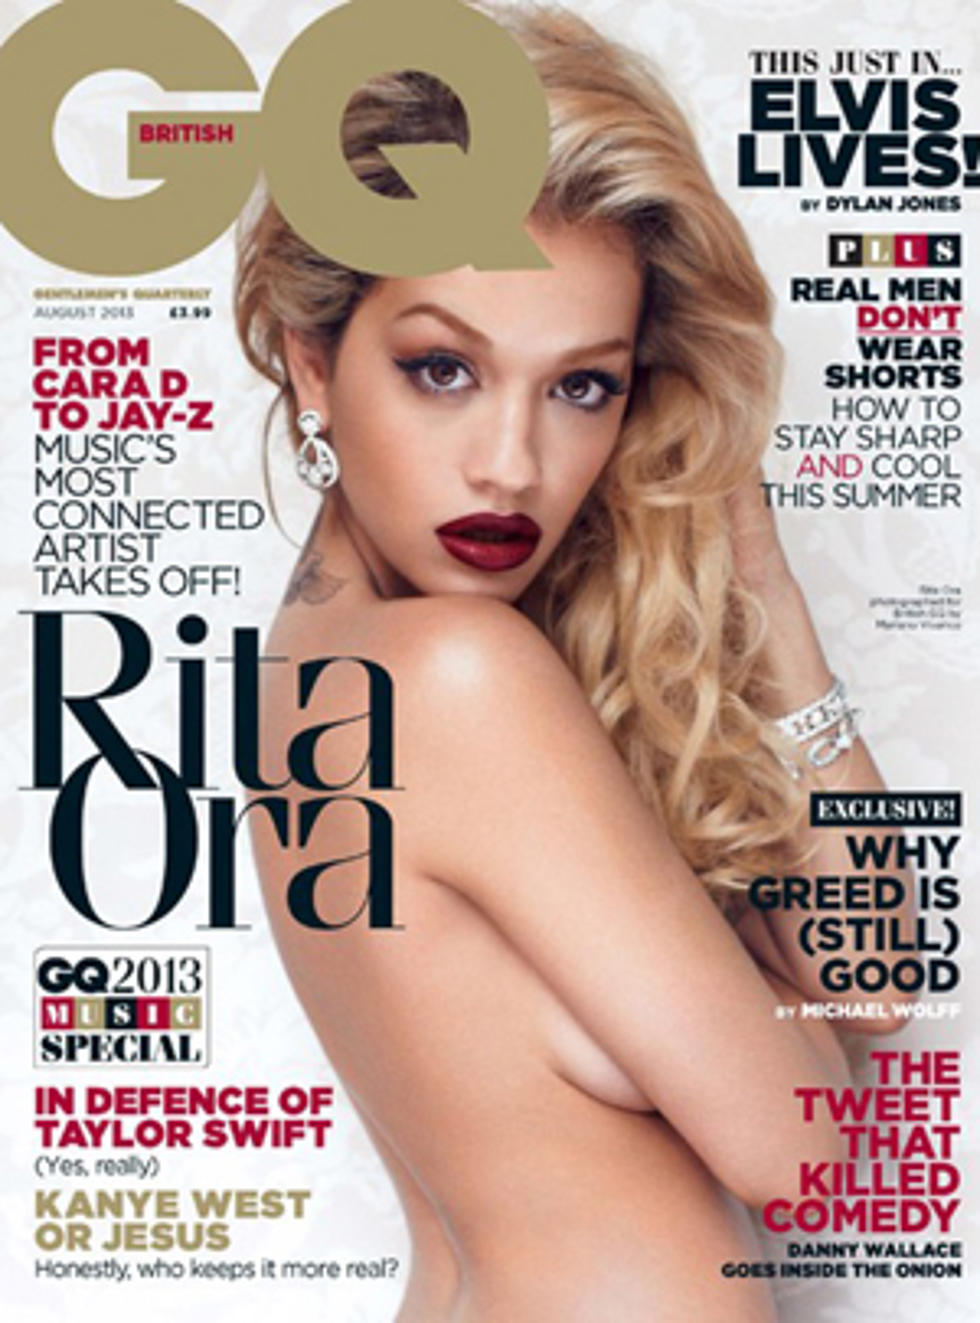 Rita Ora Poses Topless on British GQ Cover, Reveals How She Feels About Boyfriend Calvin Harris [Pics]